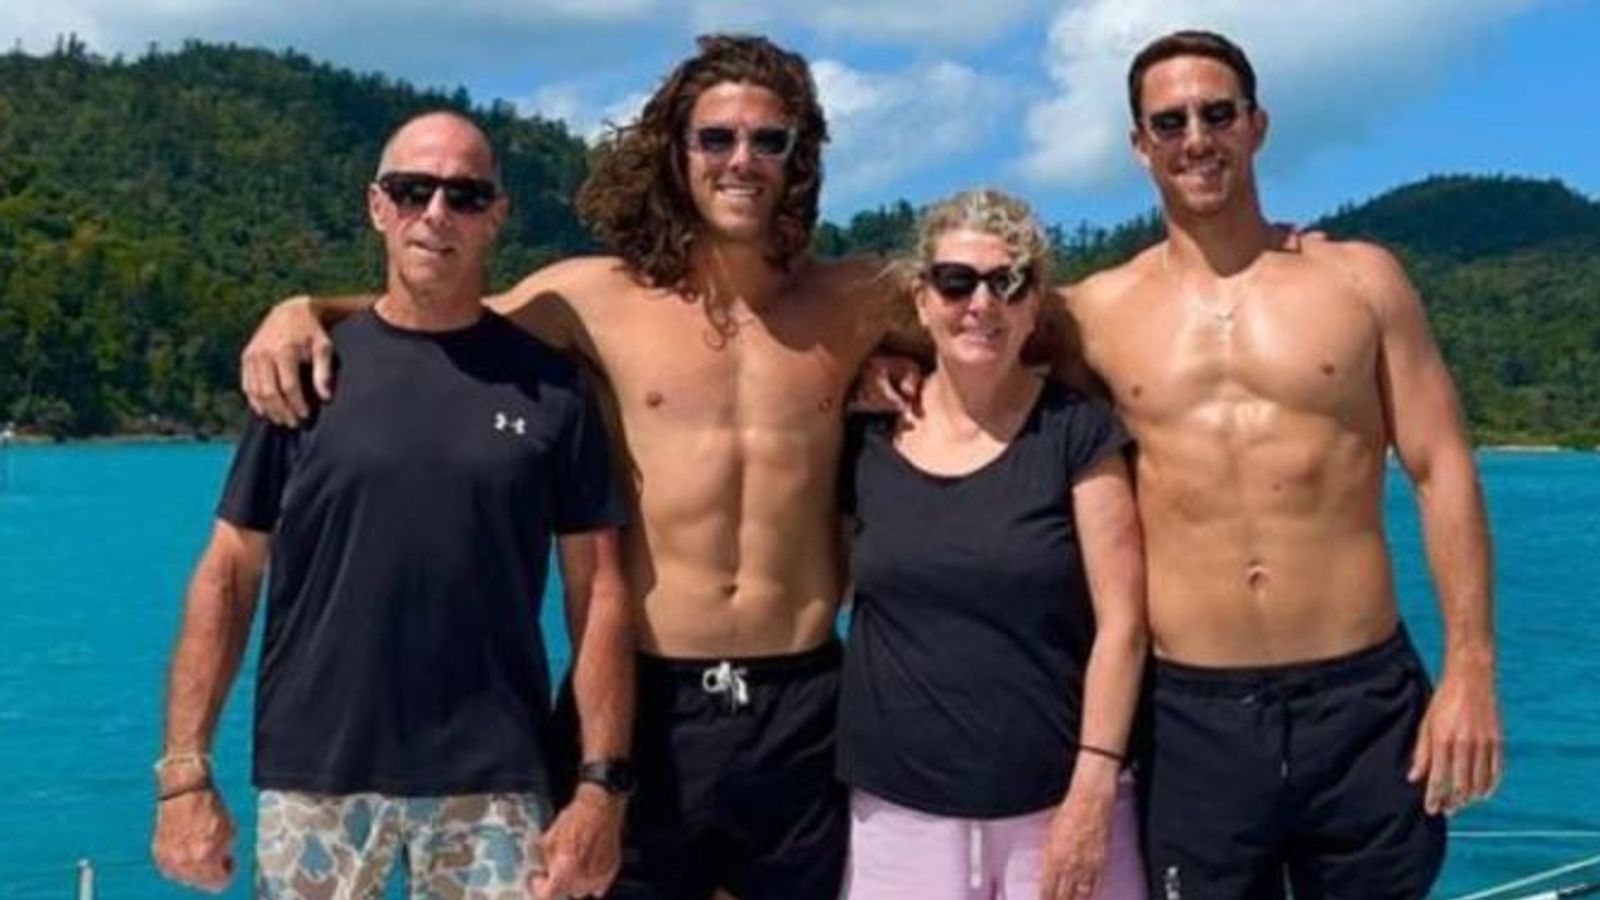 Mother of brothers killed by thieves on surfing trip says world 'a darker place'